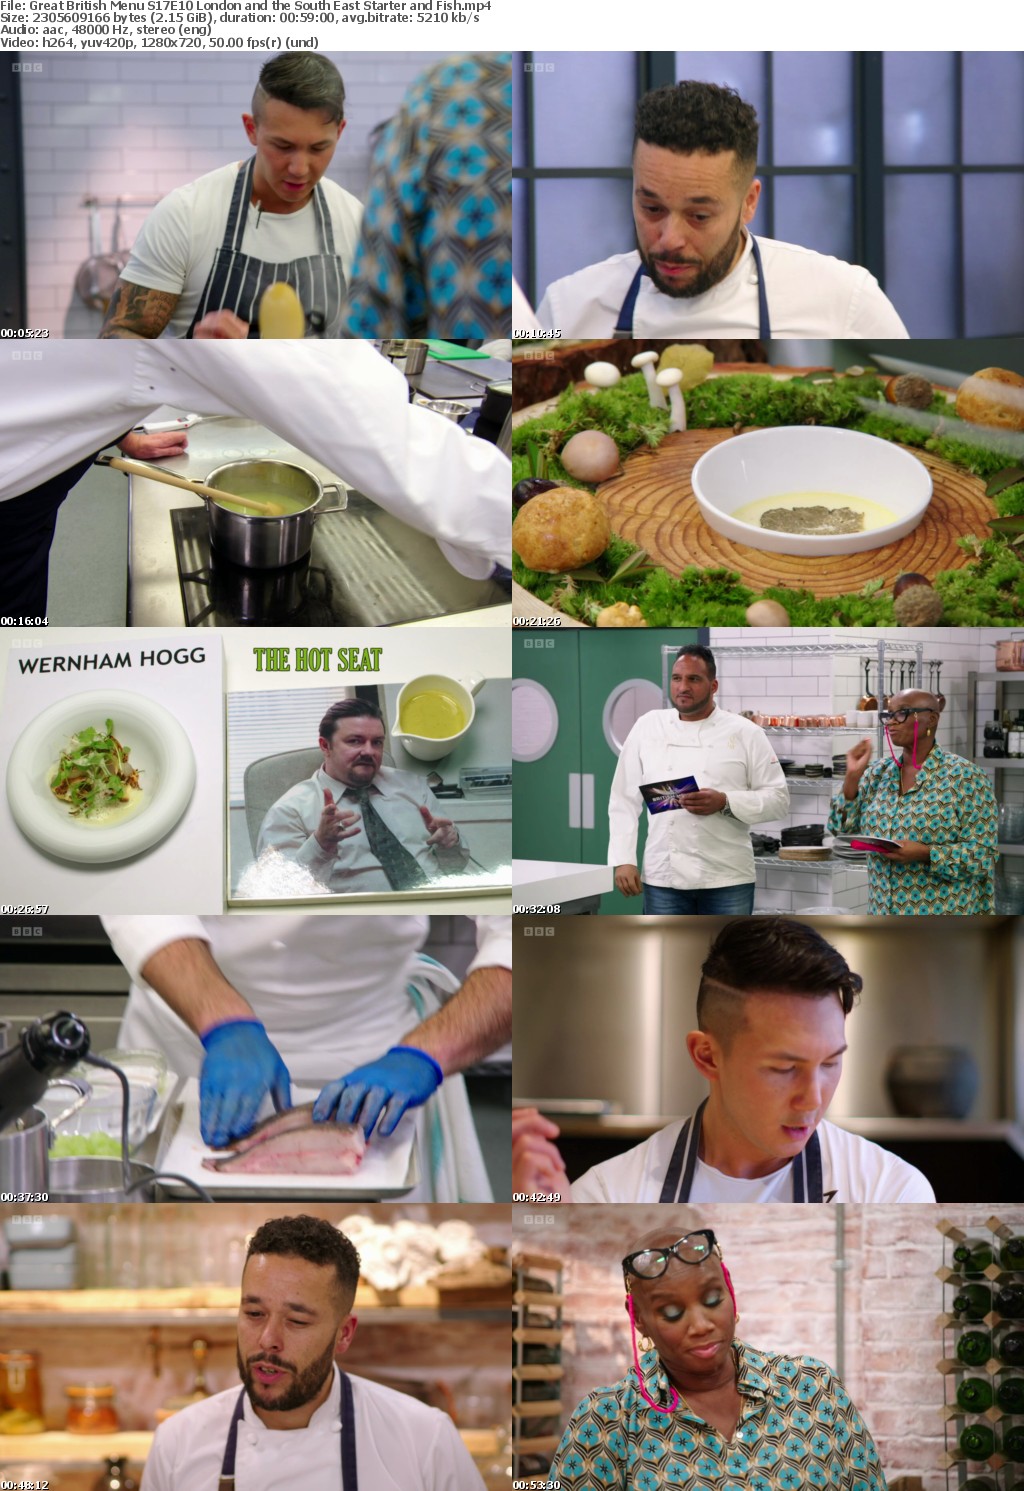 Great British Menu S17E10 London and the South East Starter and Fish (1280x720p HD, 50fps, soft Eng subs)